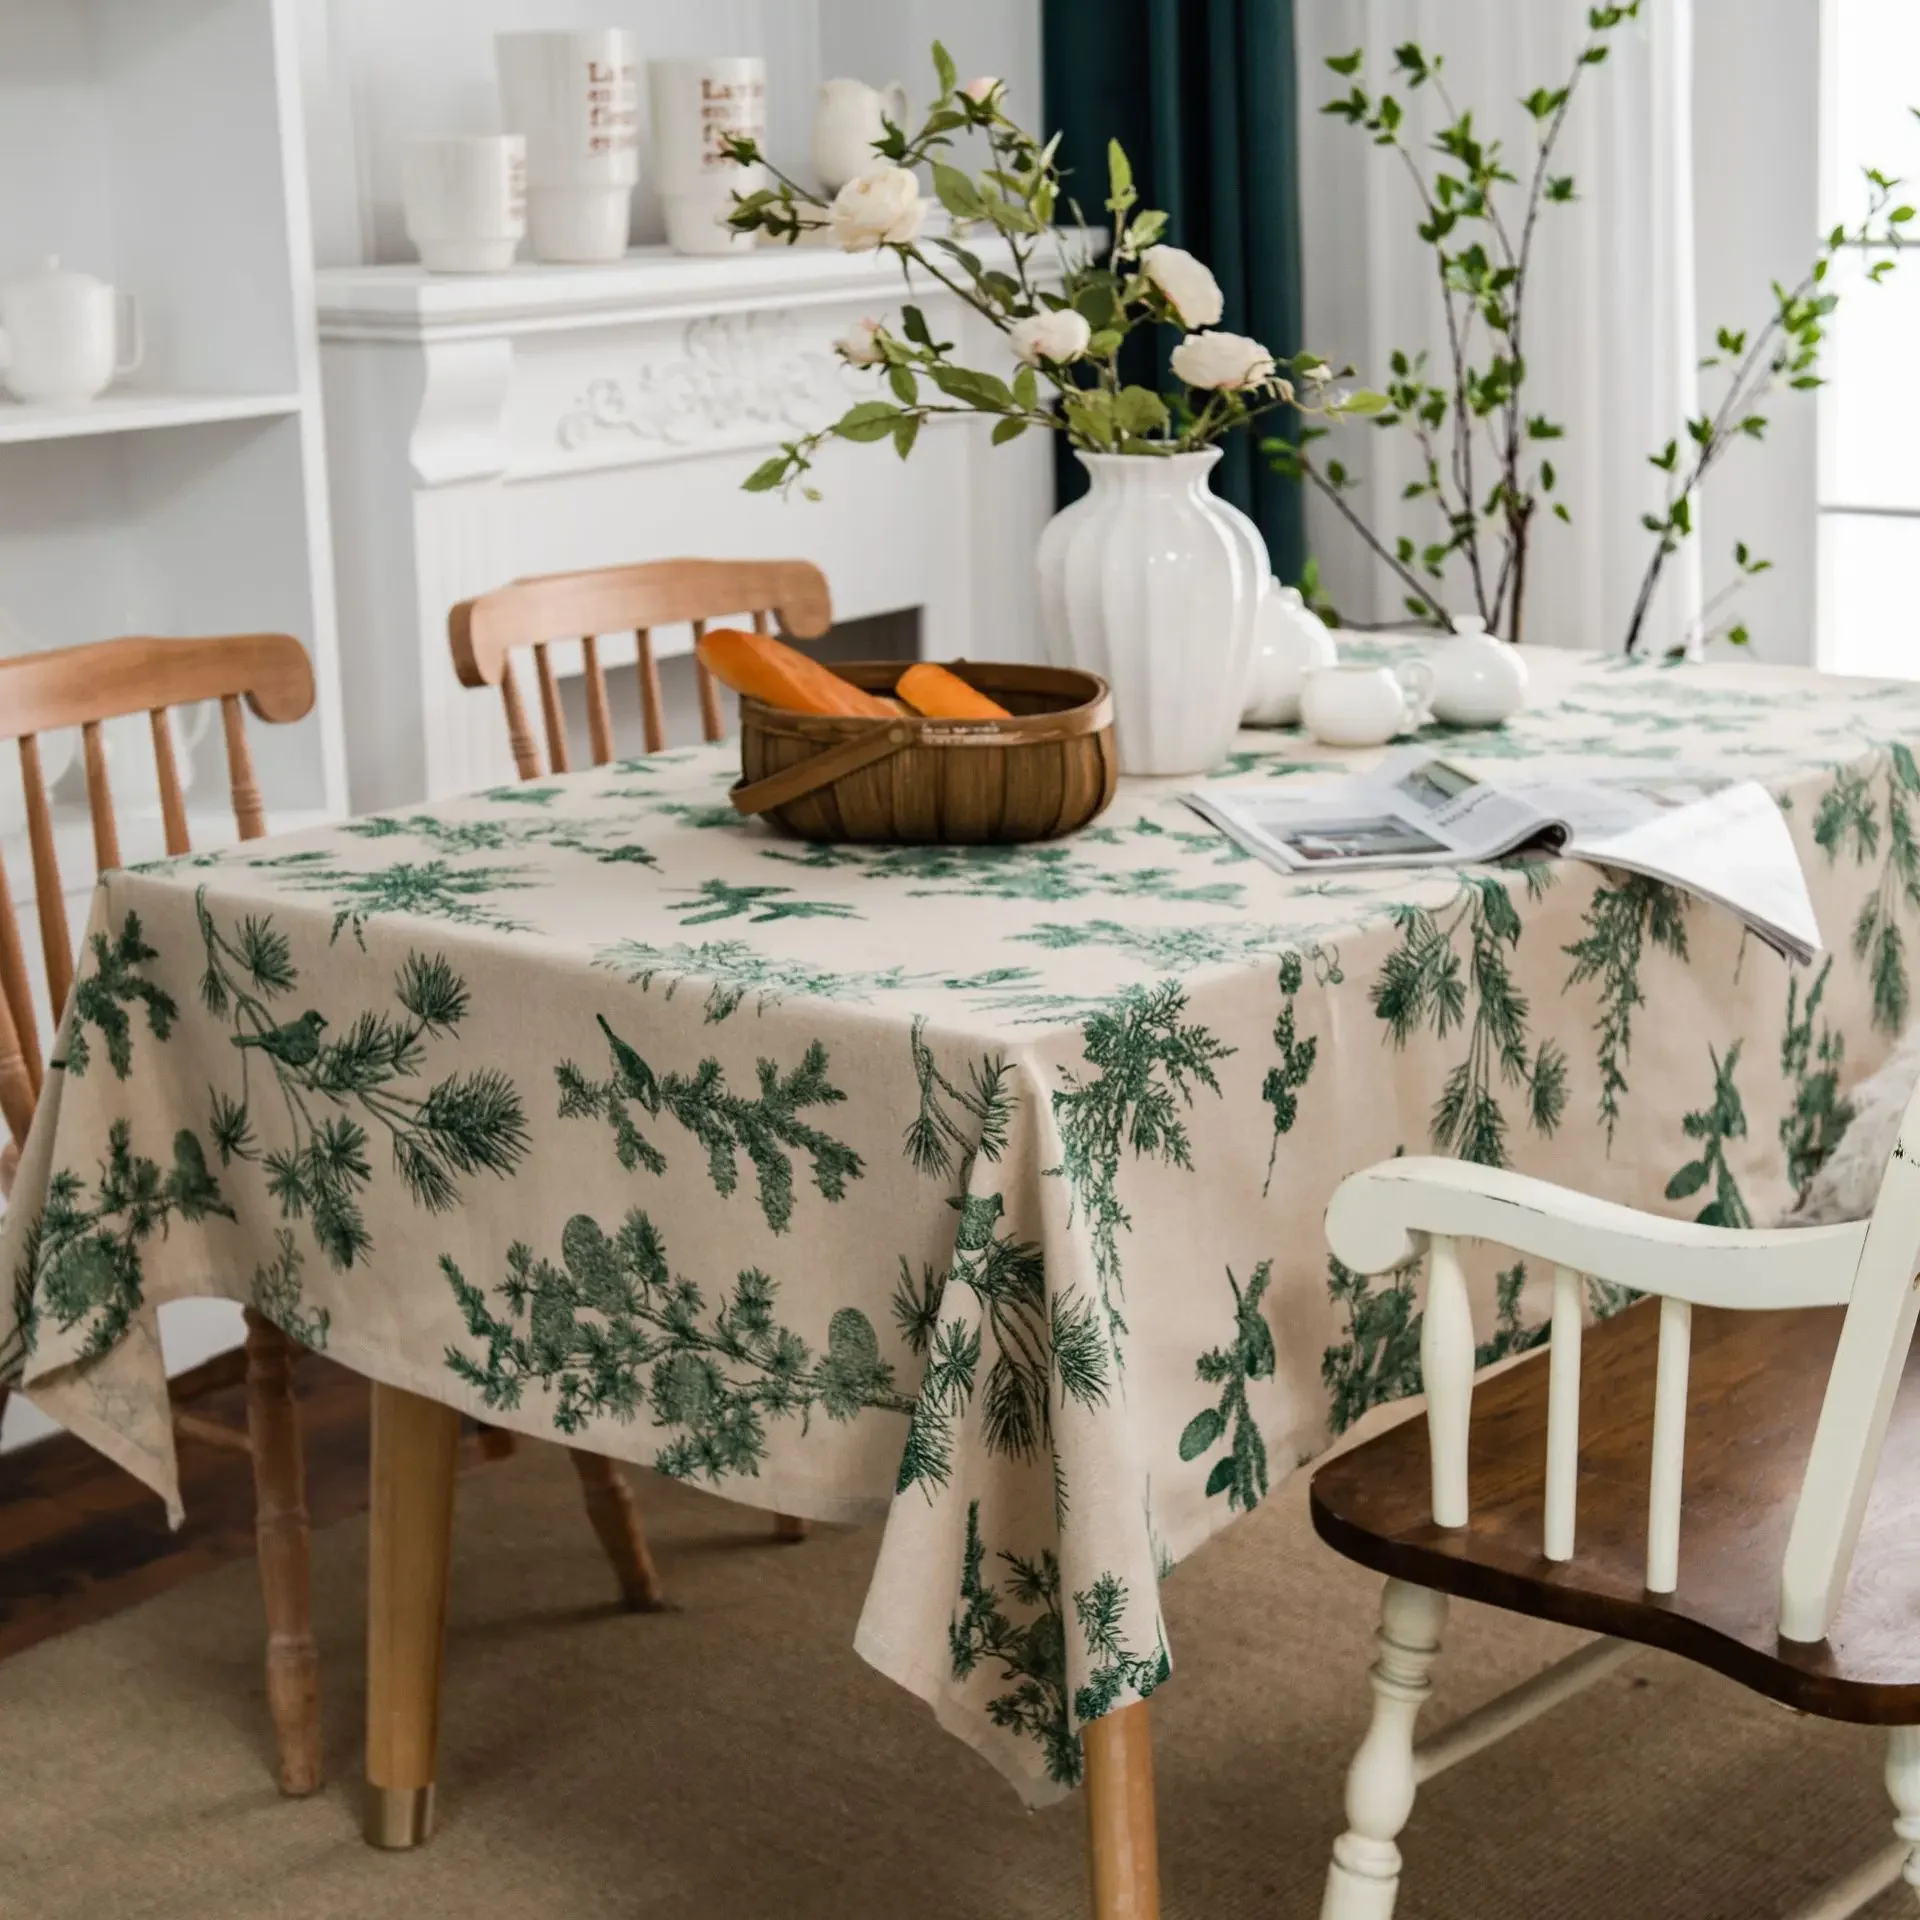 

Cotton Linen Tablecloth, Beige Green Pine Trees Cones, American Rural and Pastoral Style, Table Cover Decoration